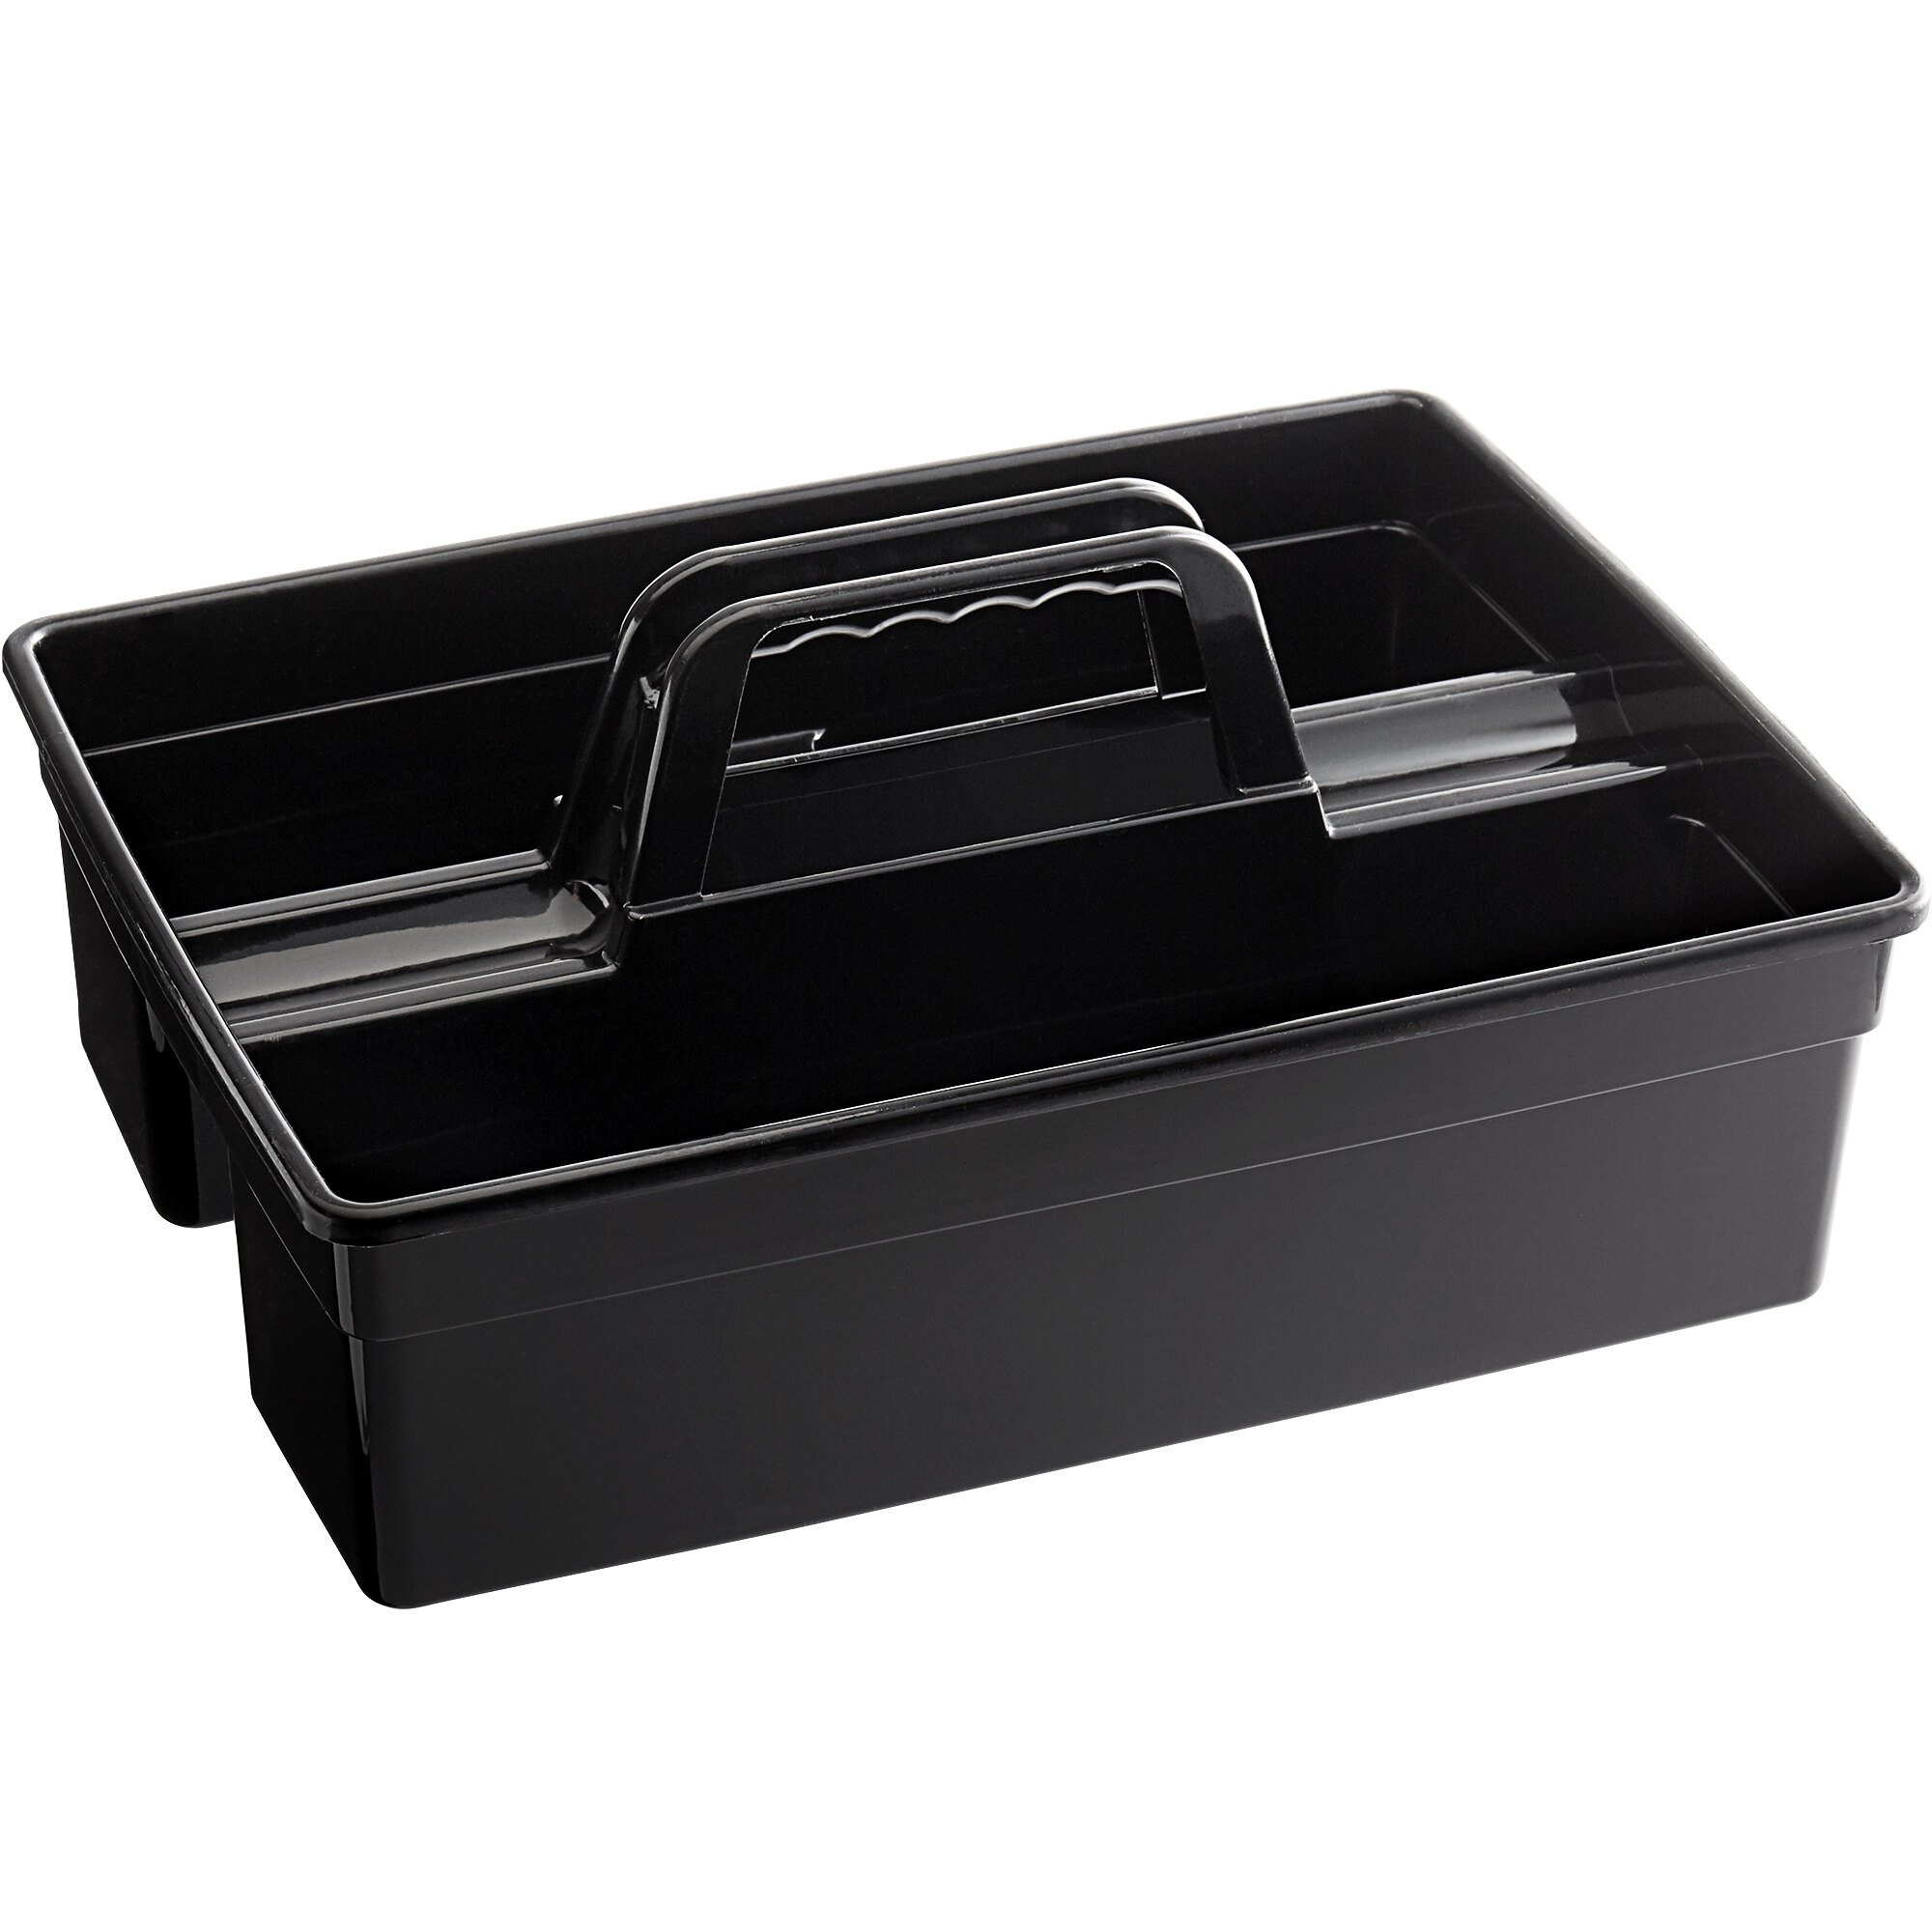 Rubbermaid 1880994 Black Executive Divided Carry Caddy